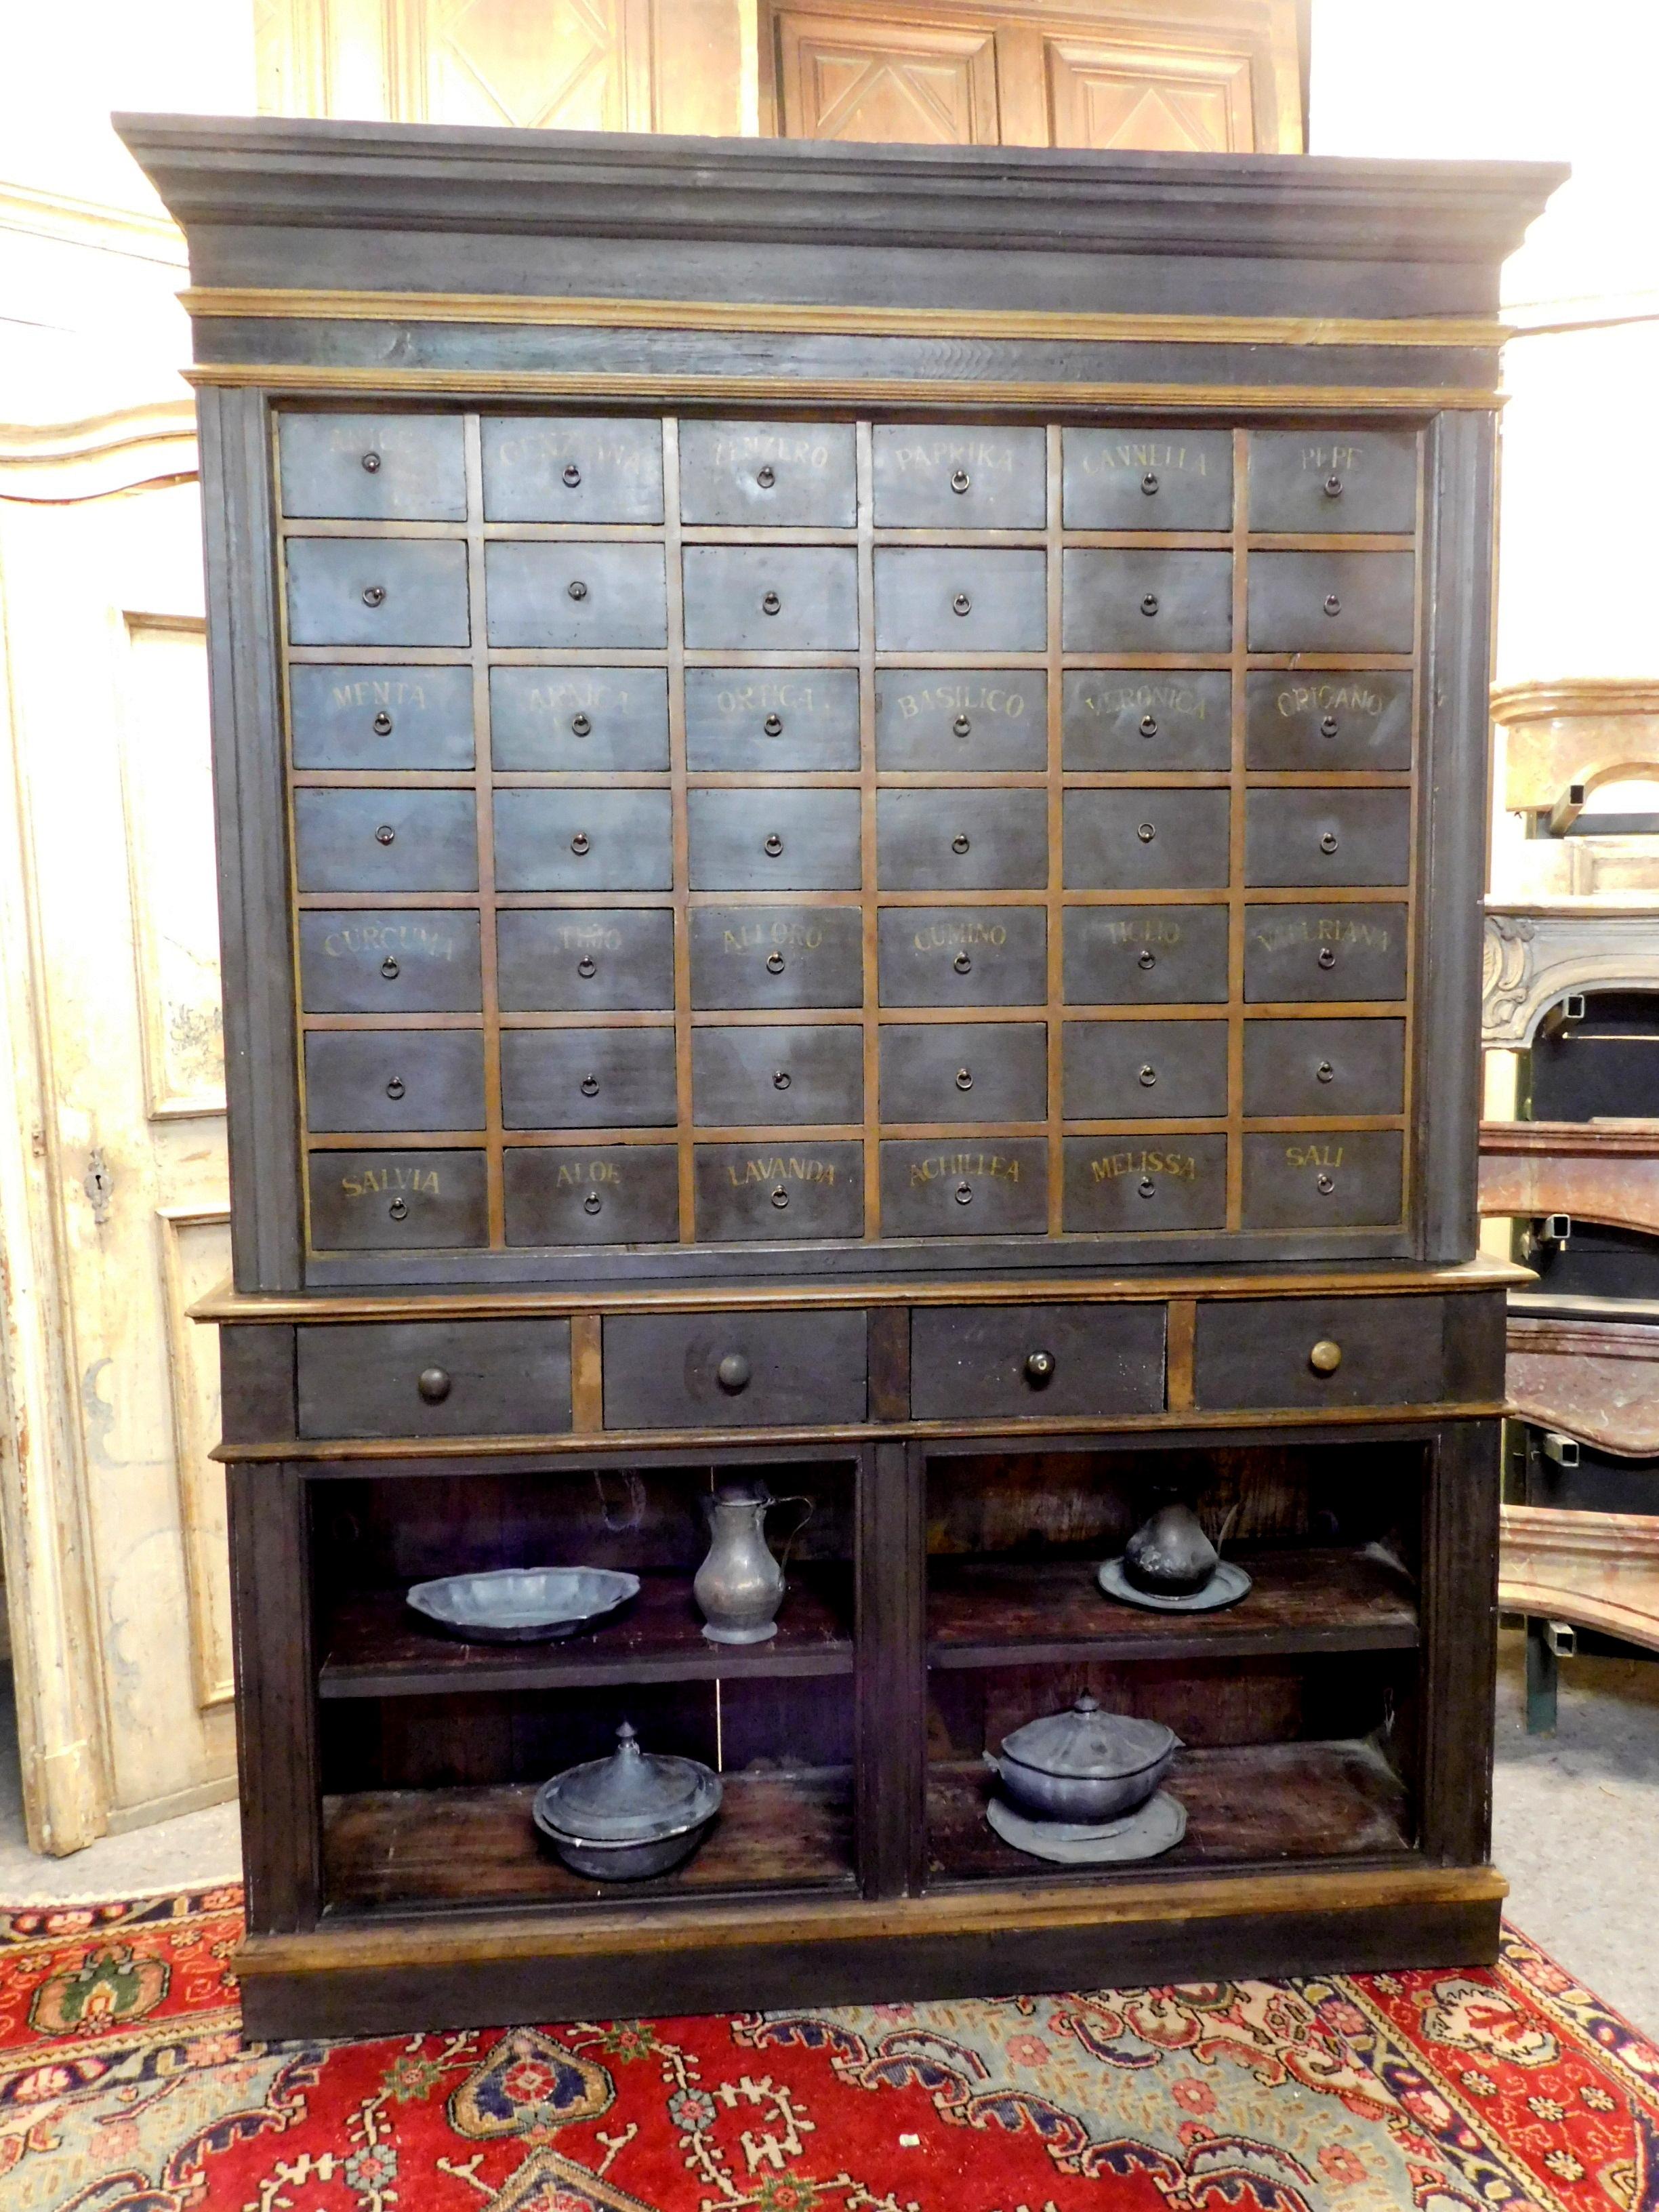 Italian Antique Herbal Pharmacy Cabinet with Named Drawers, Early 19th Century, Italy For Sale